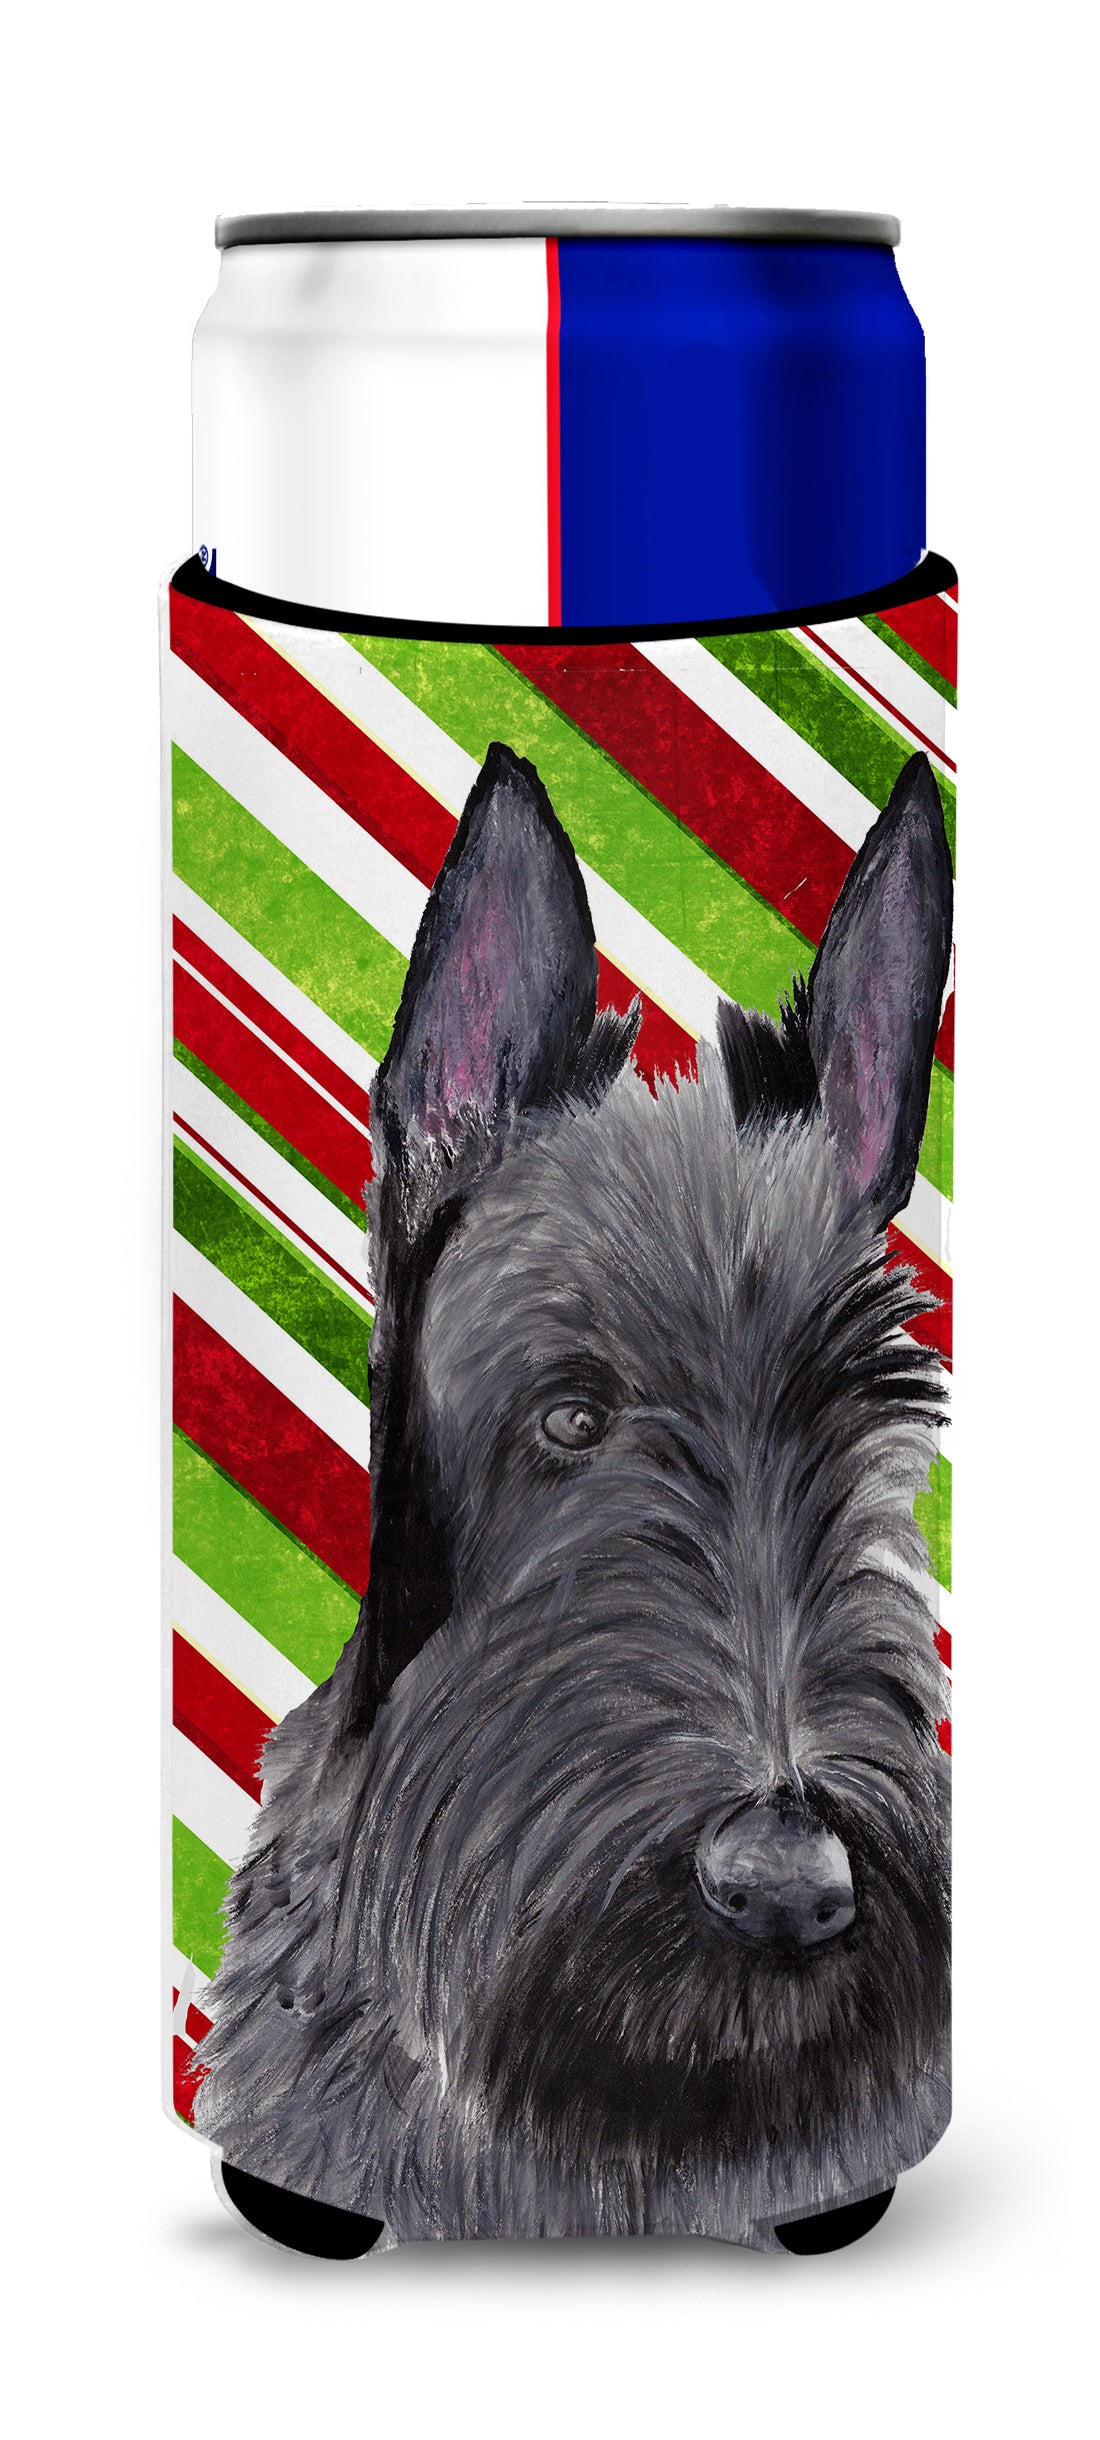 Scottish Terrier Candy Cane Holiday Christmas Ultra Beverage Insulators for slim cans SC9346MUK